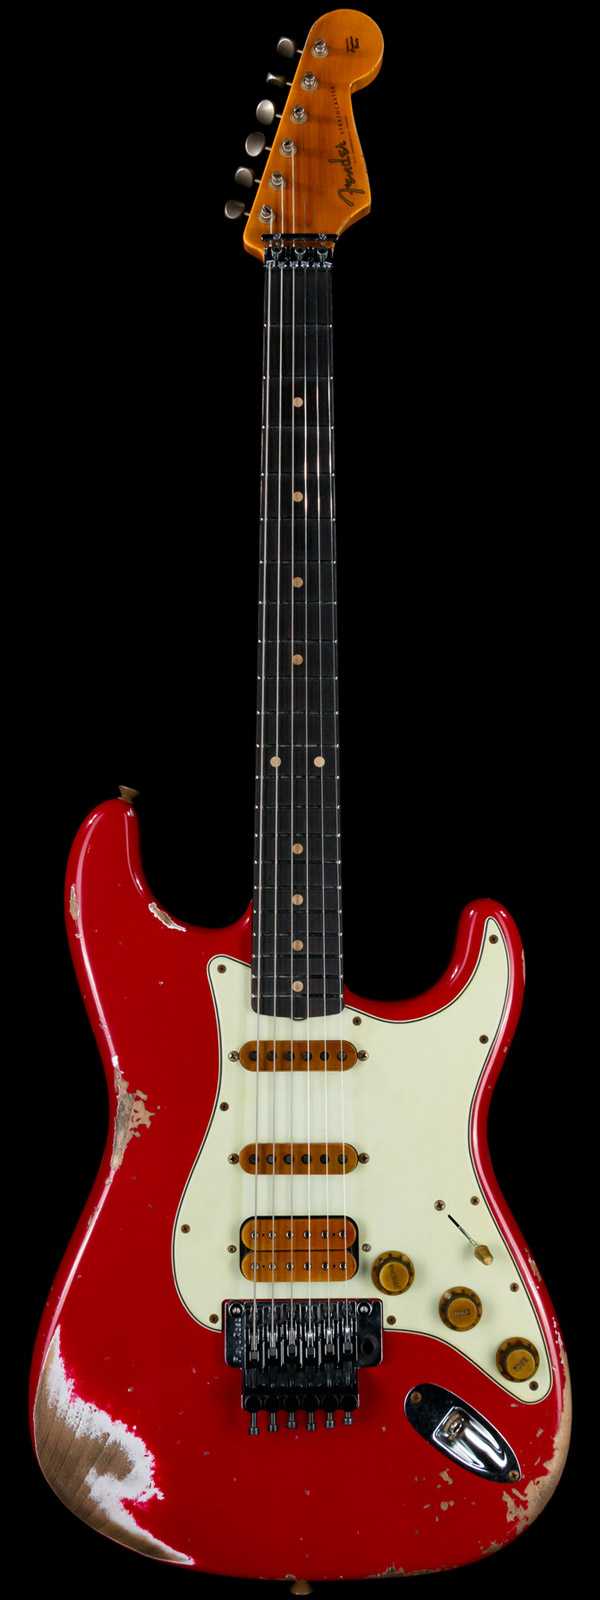 Fender Custom Shop Alley Cat Stratocaster Heavy Relic HSS Floyd Rose Rosewood Board Torino Red